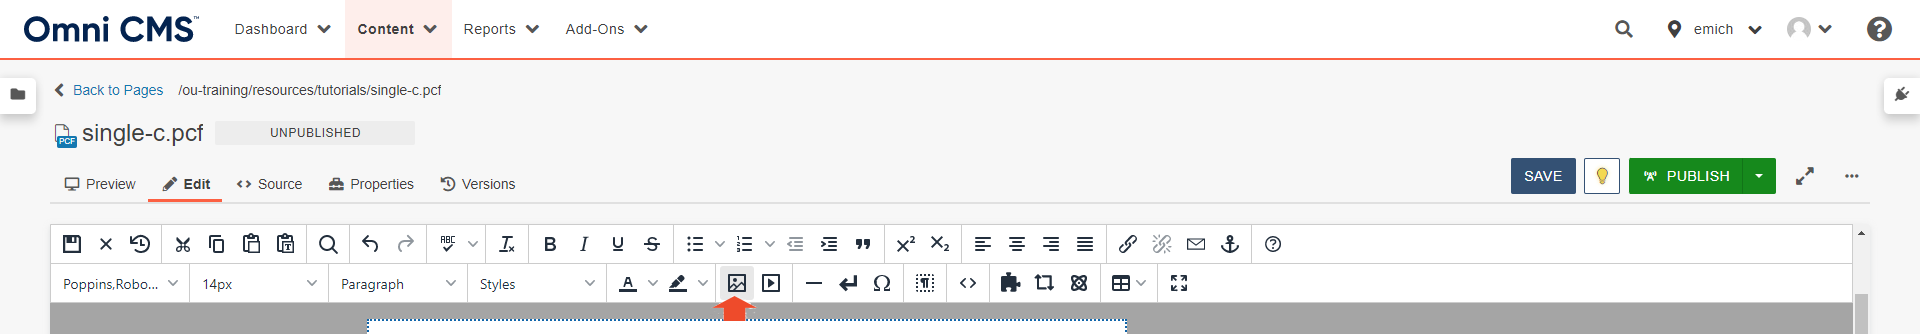 A screenshot of the insert image icon in the Omni CMS edit toolbar.